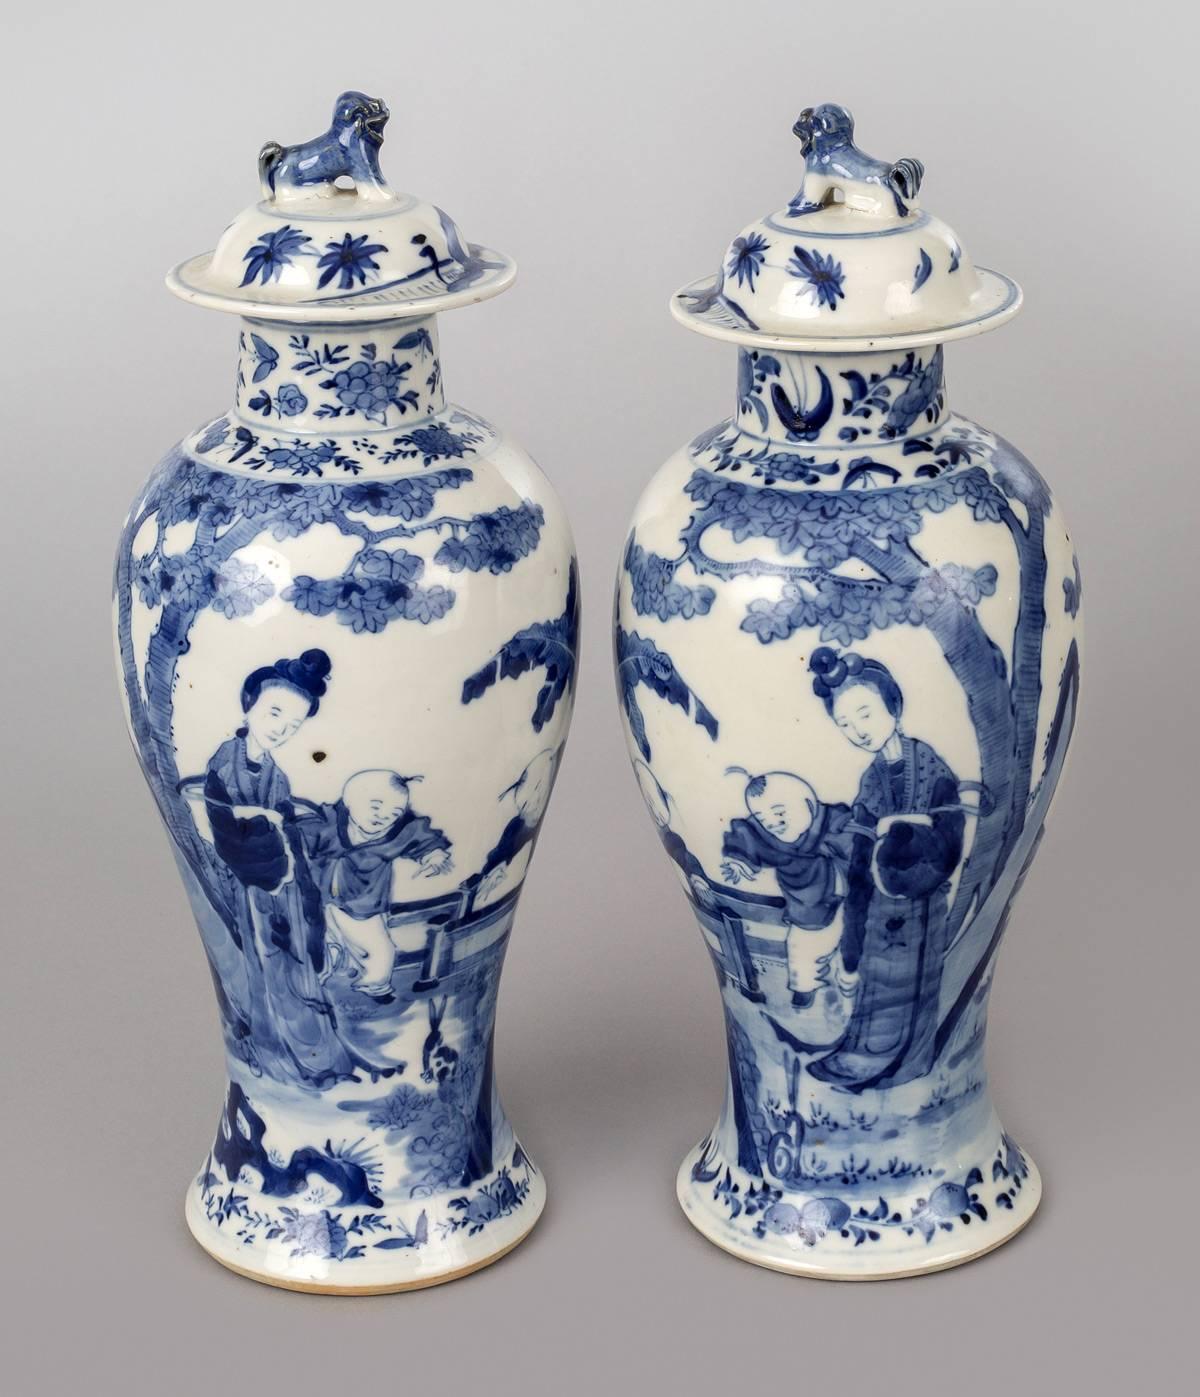 Pair of Chinese porcelain baluster-shaped lidded vases decorated with an elegant lady and two children playing under a banana tree. The neck and shoulder decorated with flowers and foliage. The lids have foo dog finials. Four character mark on